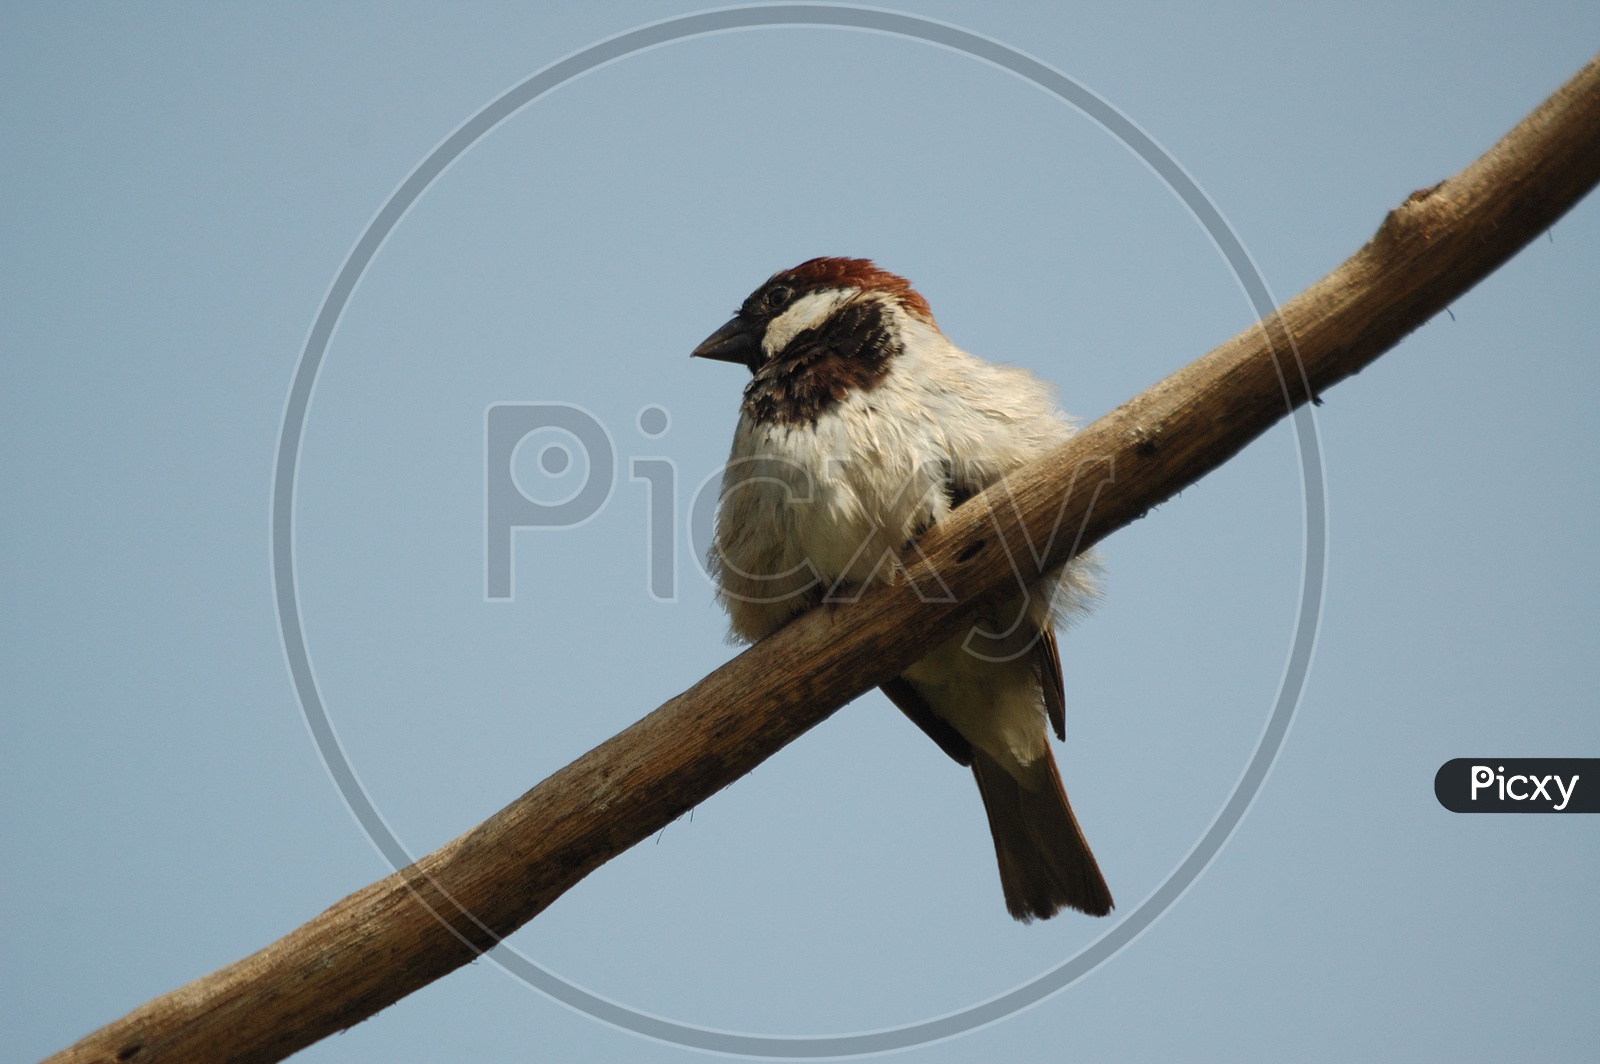 A House Sparrow on a tree branch